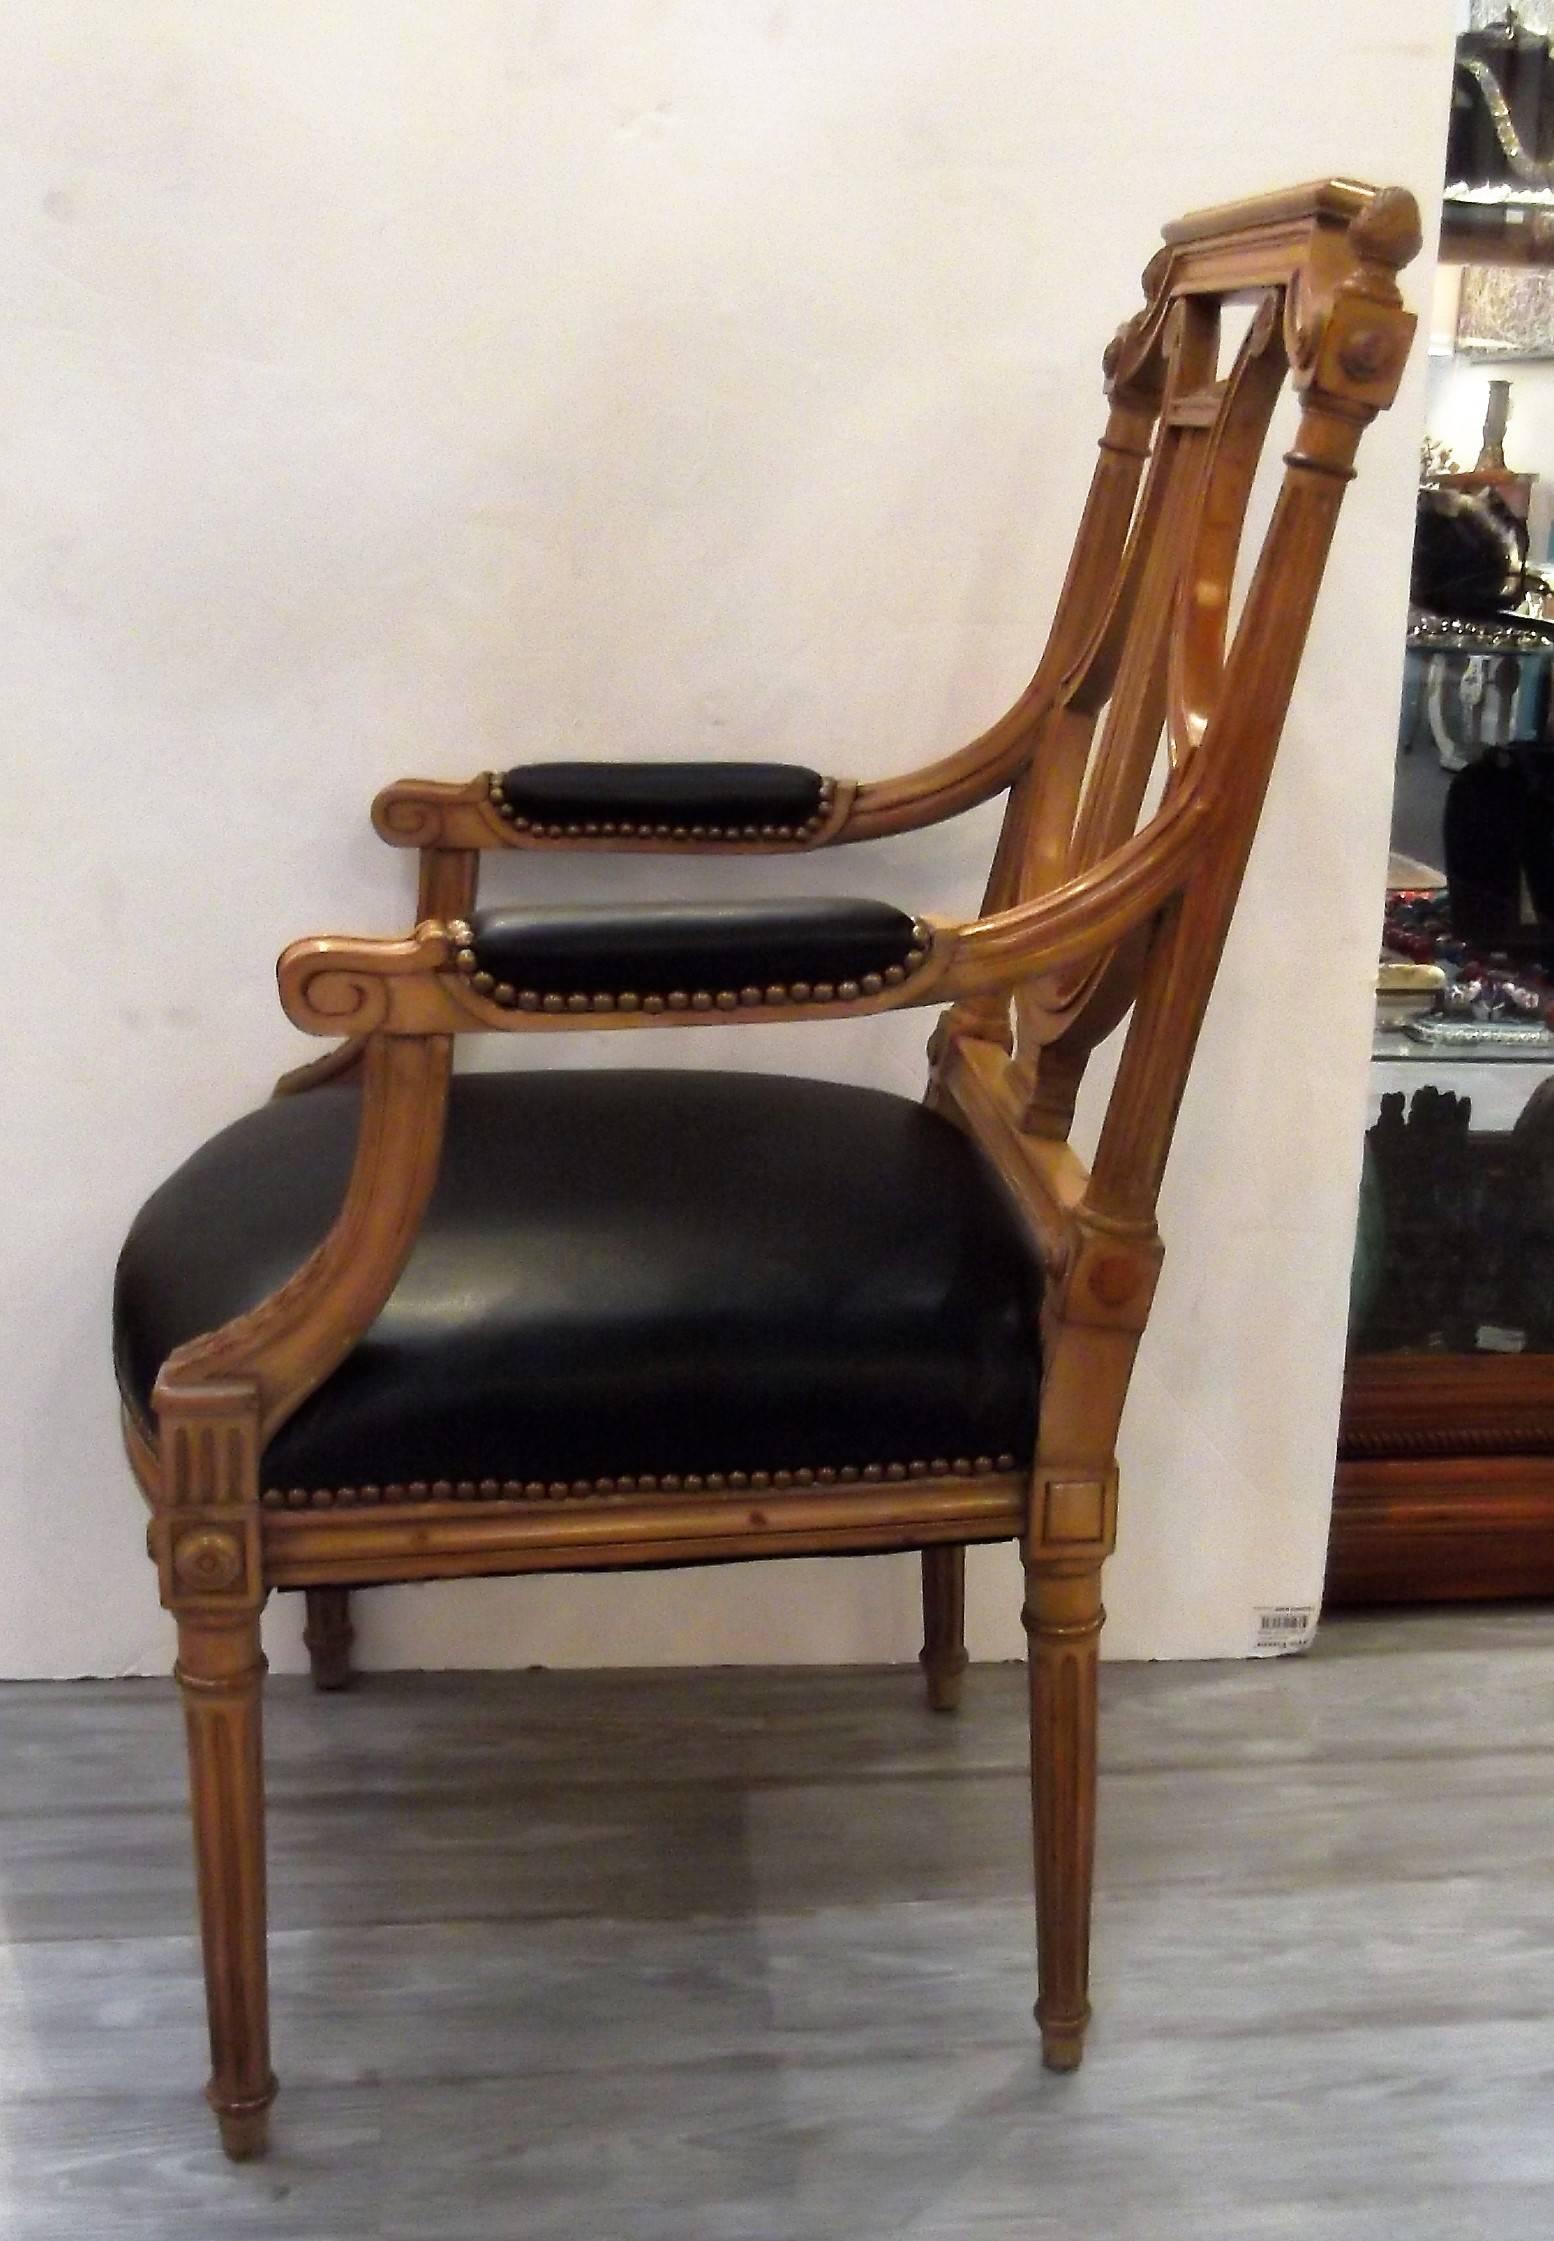 Classic Louis XVI style armchair with lyre back. The sturdy hand-carved frame of yew wood is newly covered in black leather with antiqued nailhead trim.